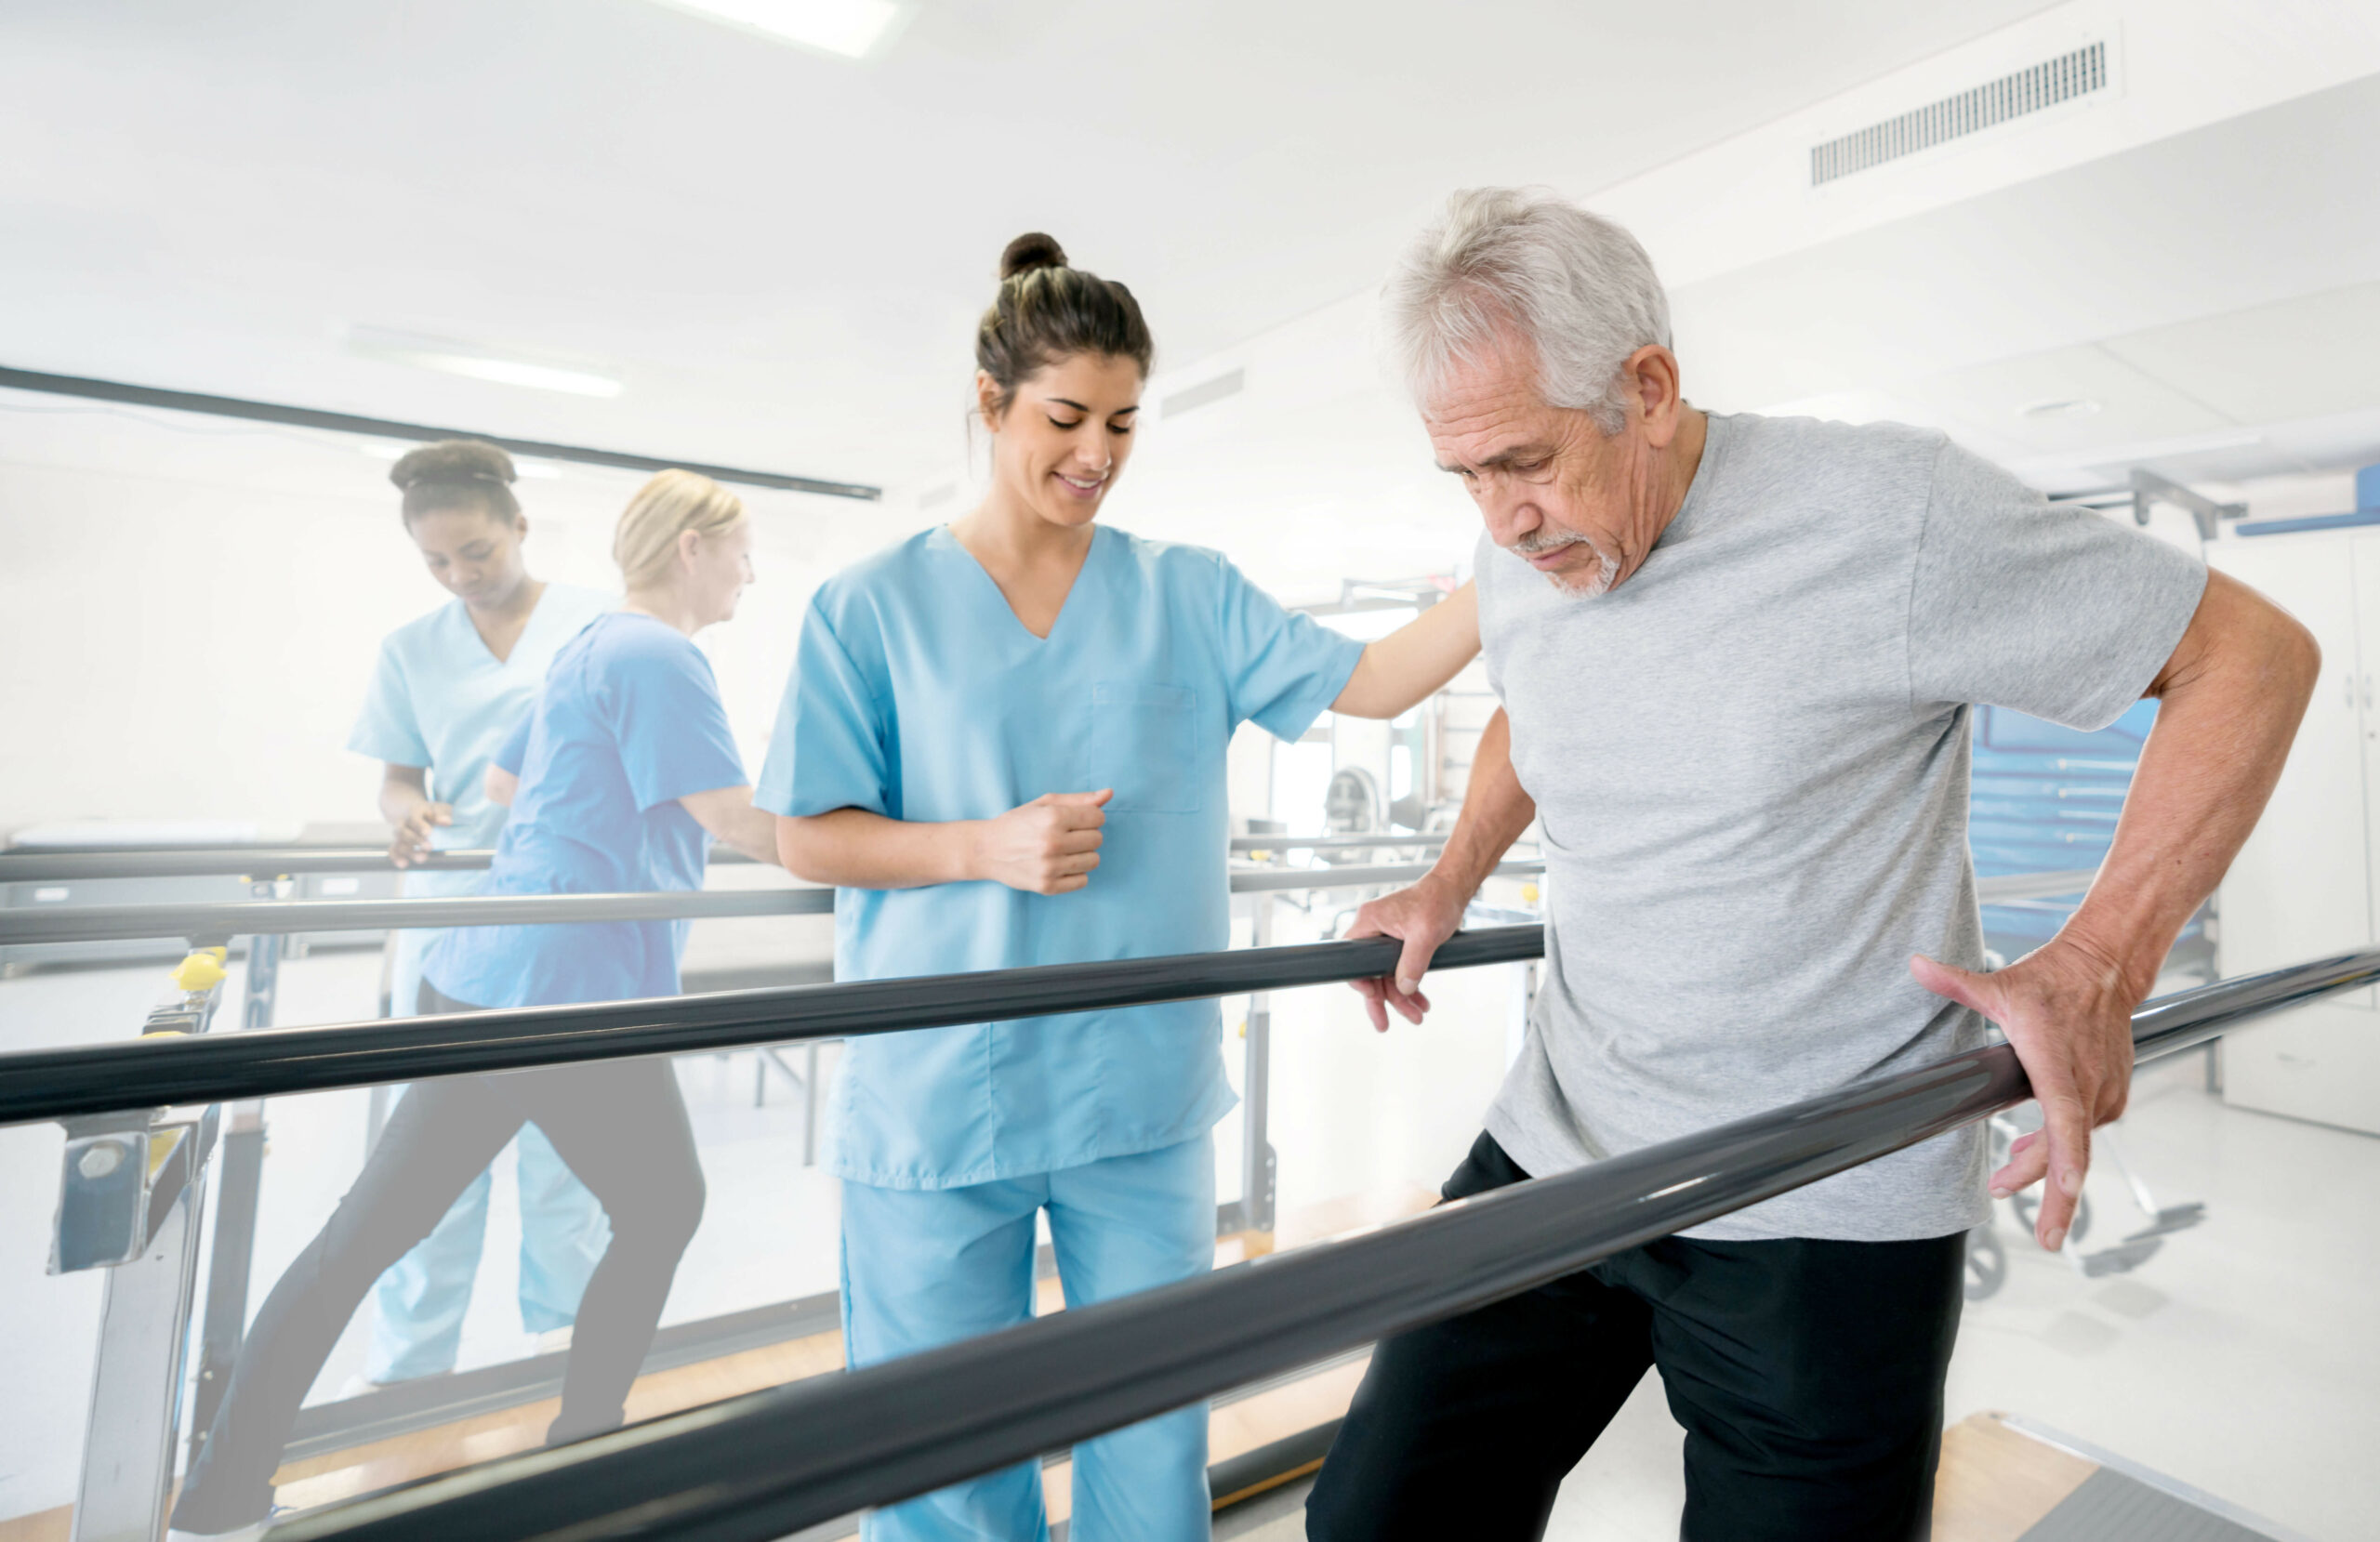 Aide helping an older man with physical rehabilitation